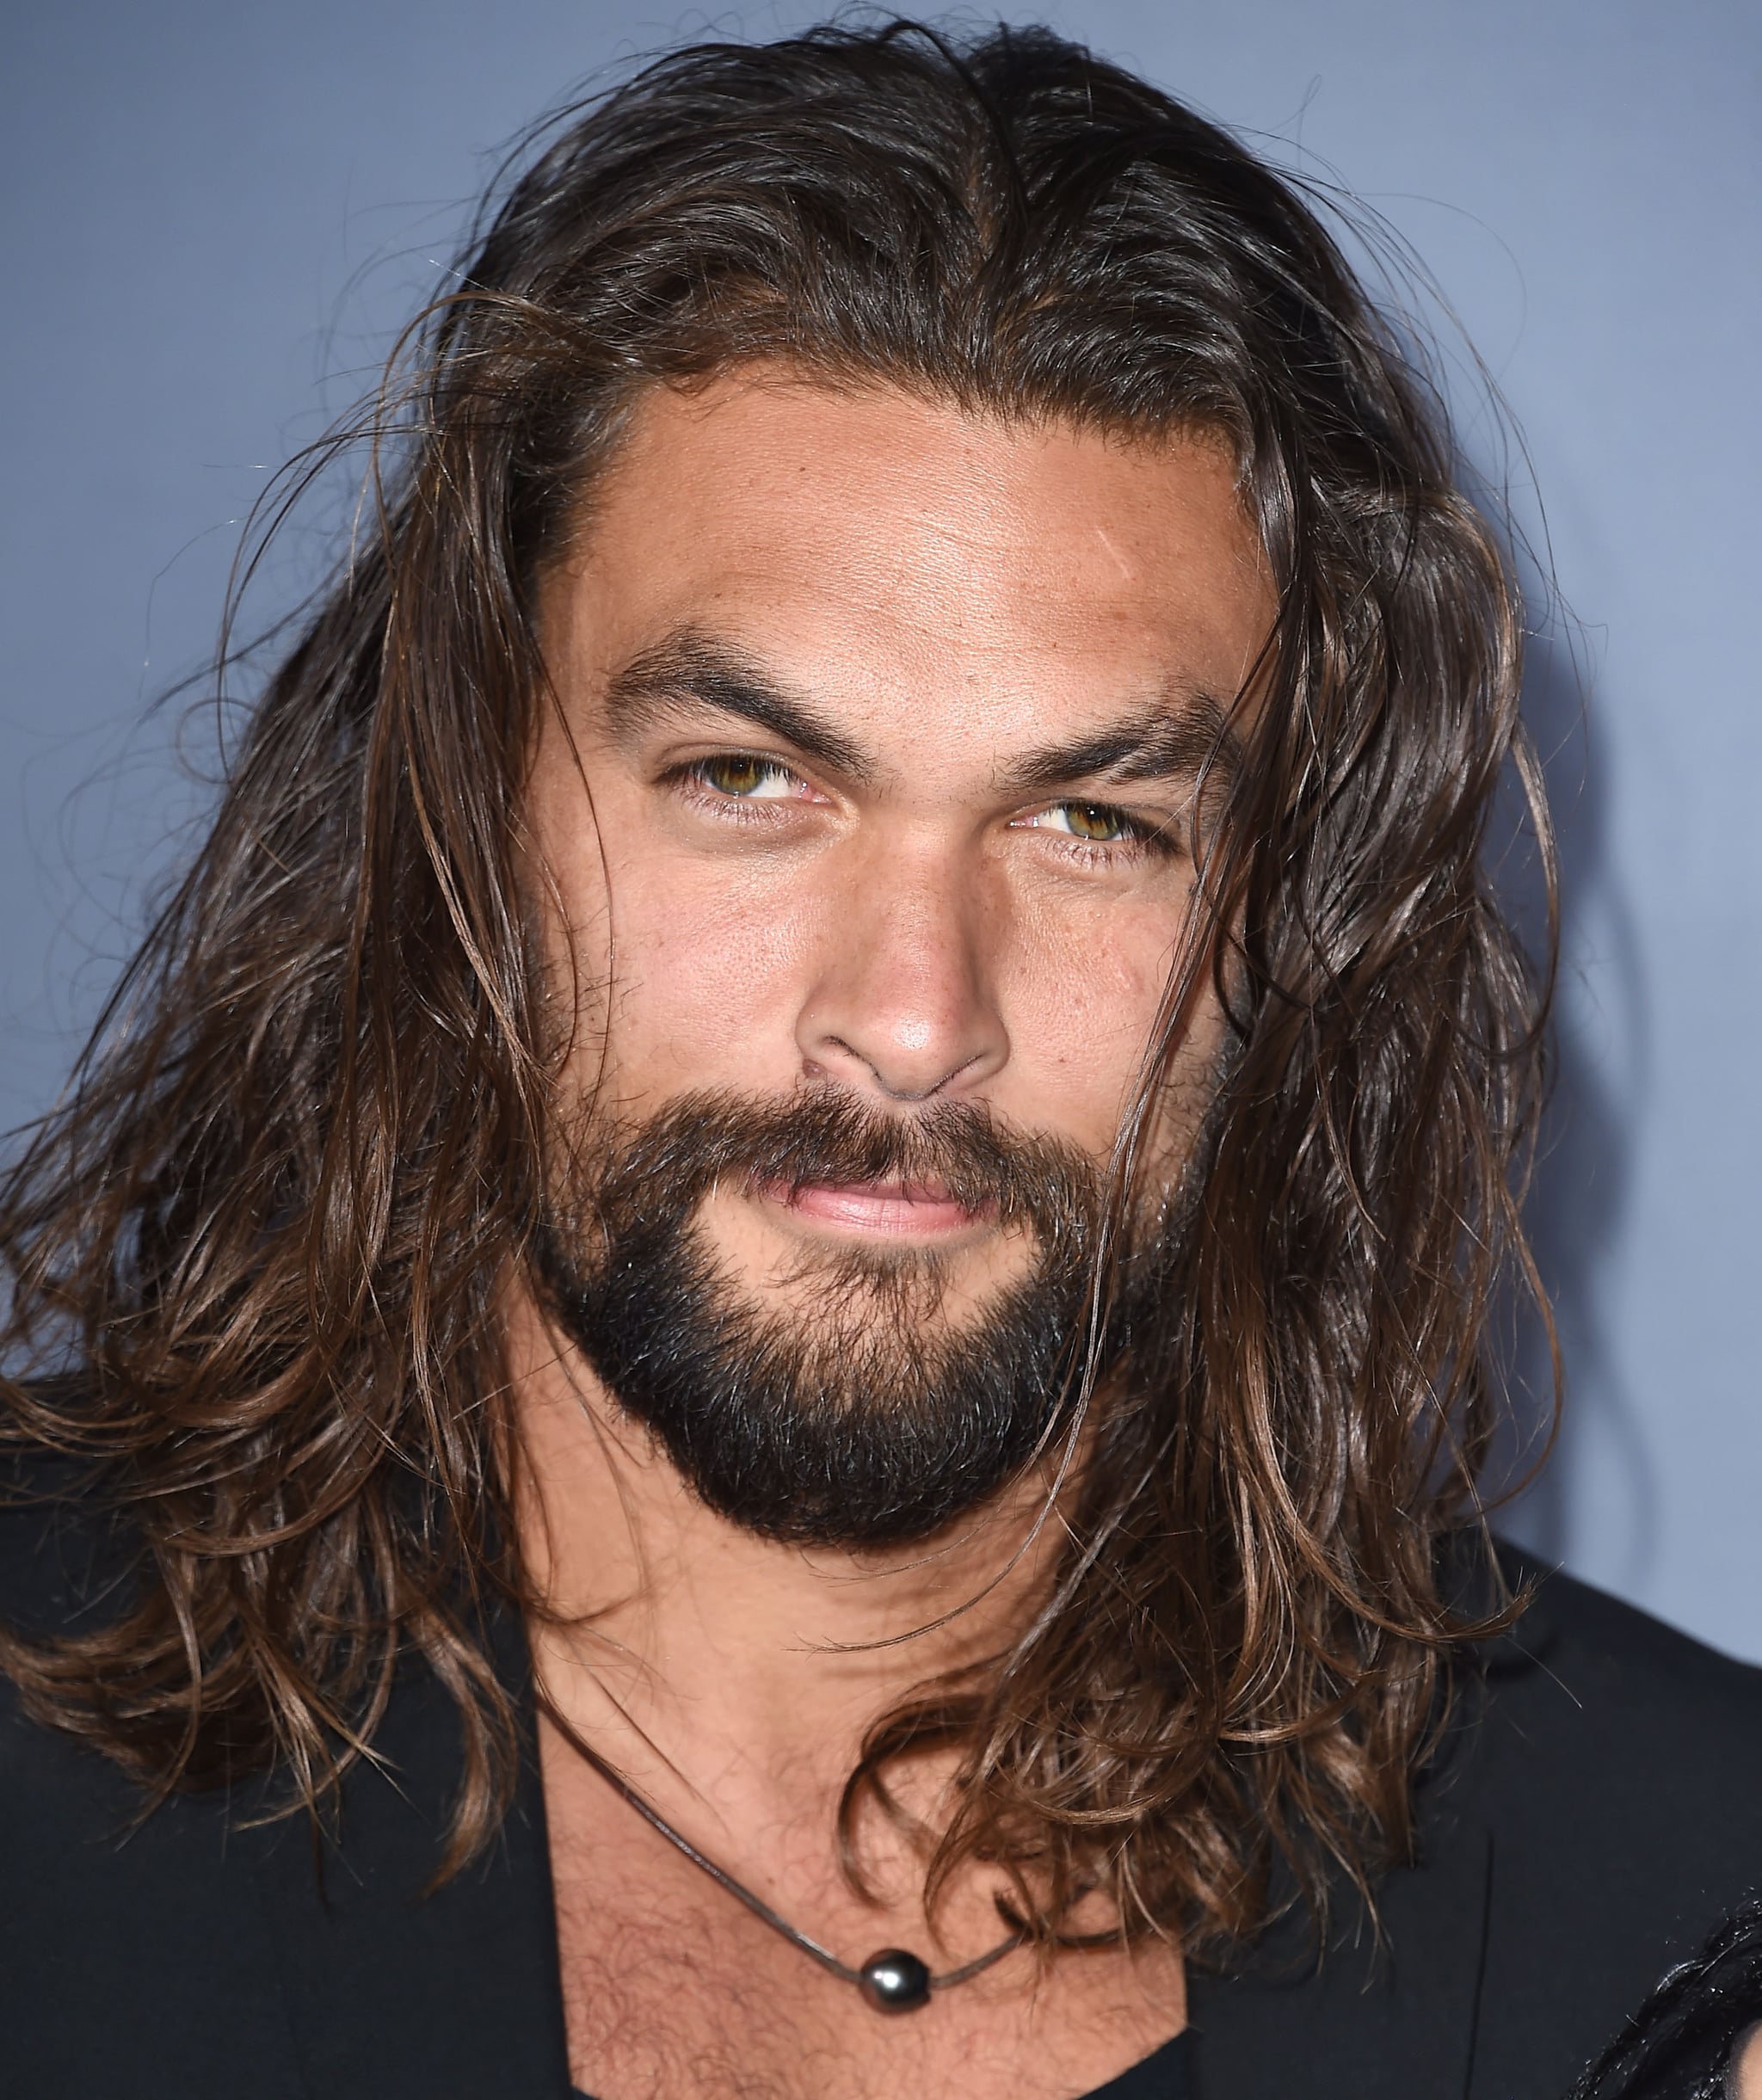 Jason Momoa as Aquaman | Willem Dafoe Has Joined the Justice League ...